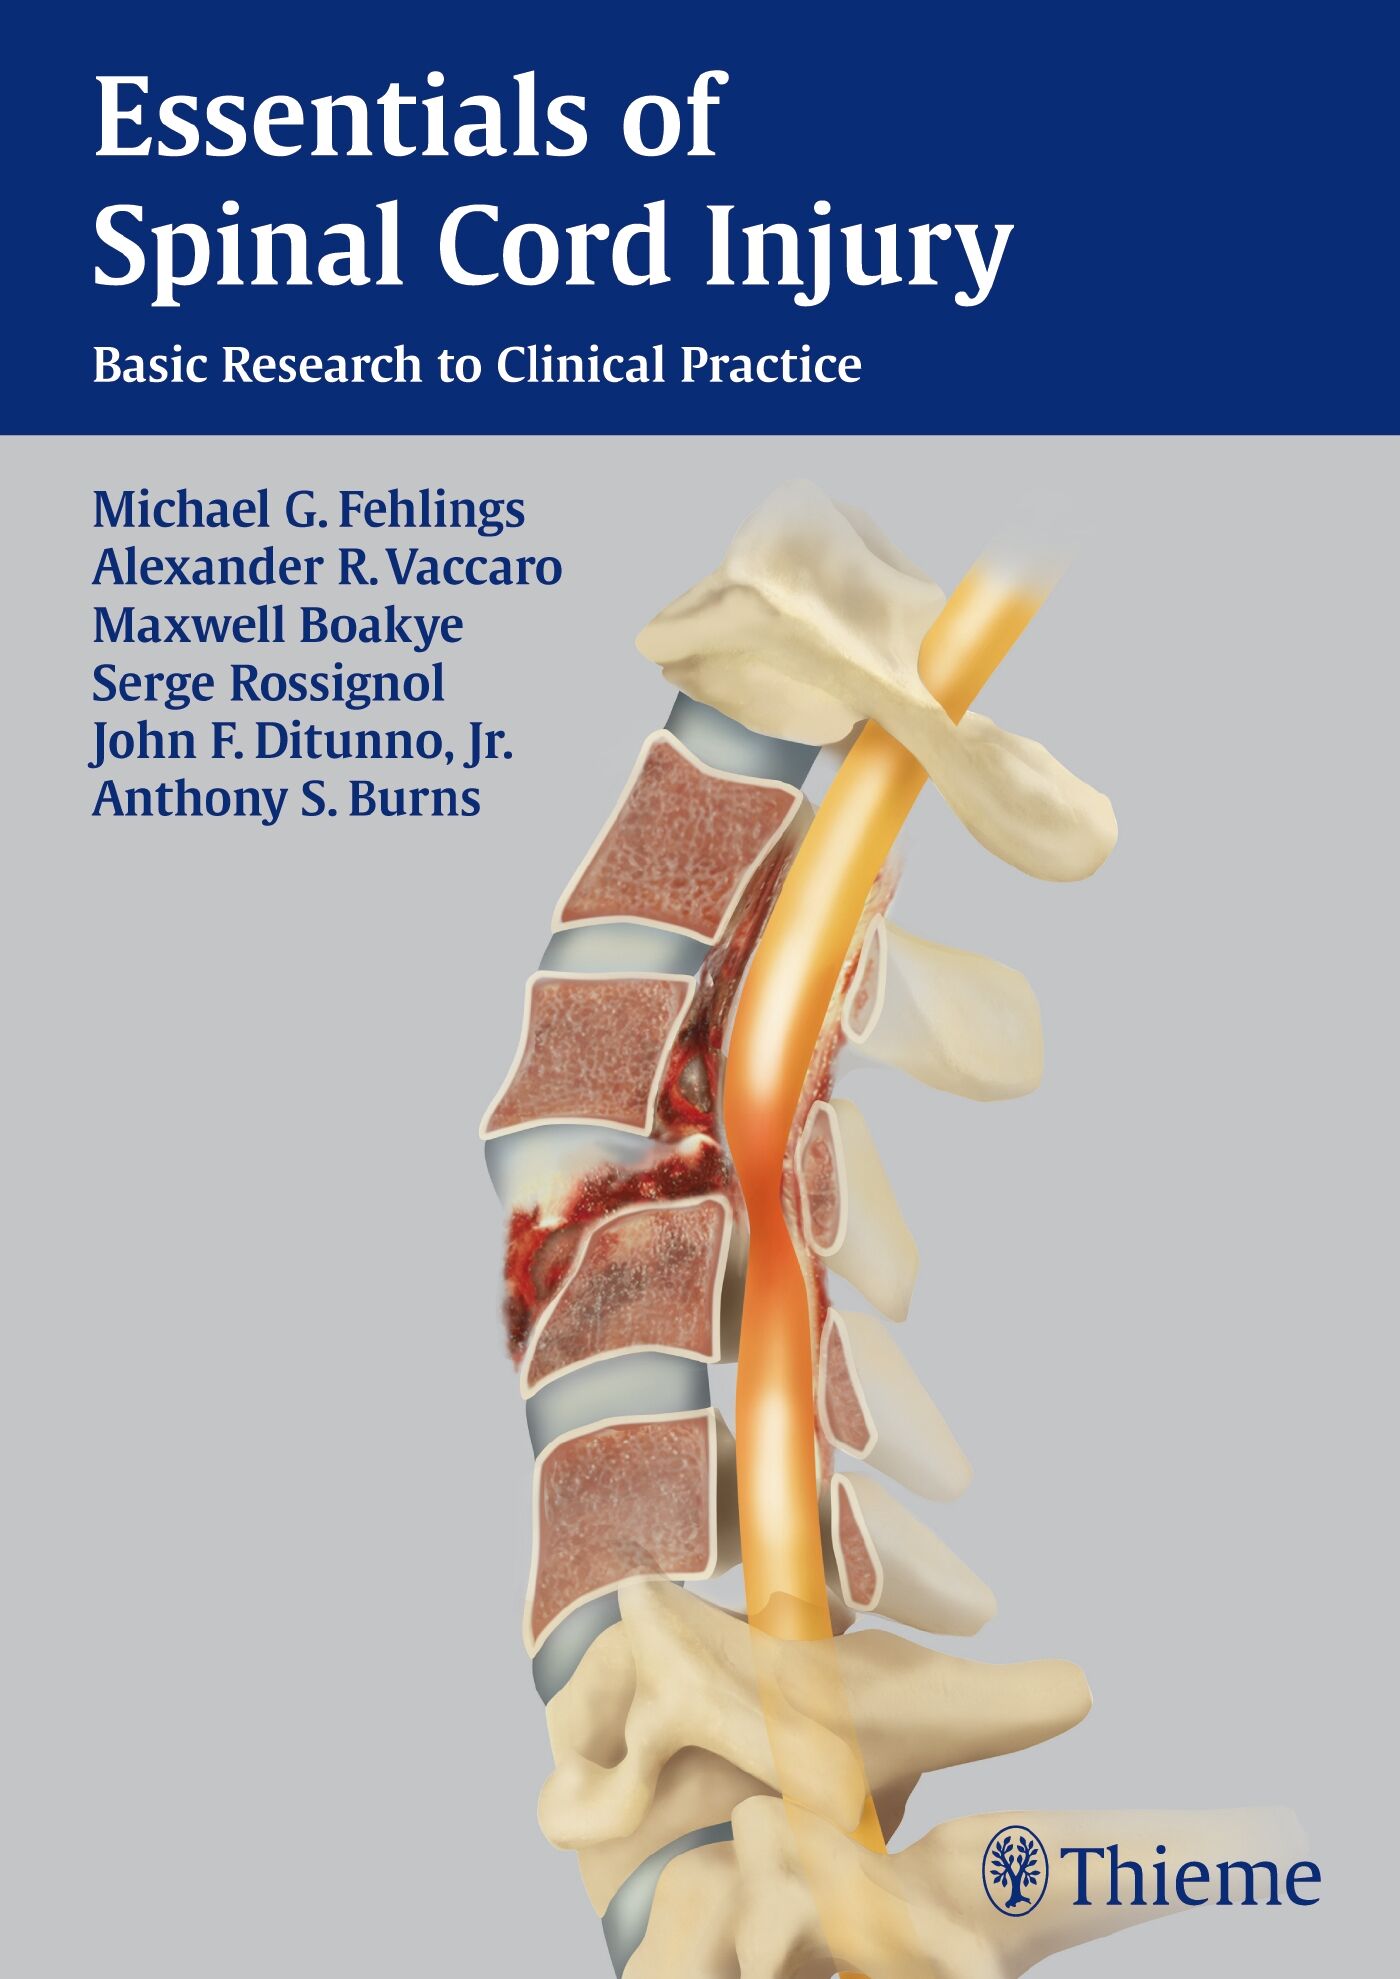 Essentials of Spinal Cord Injury, 9781604067262